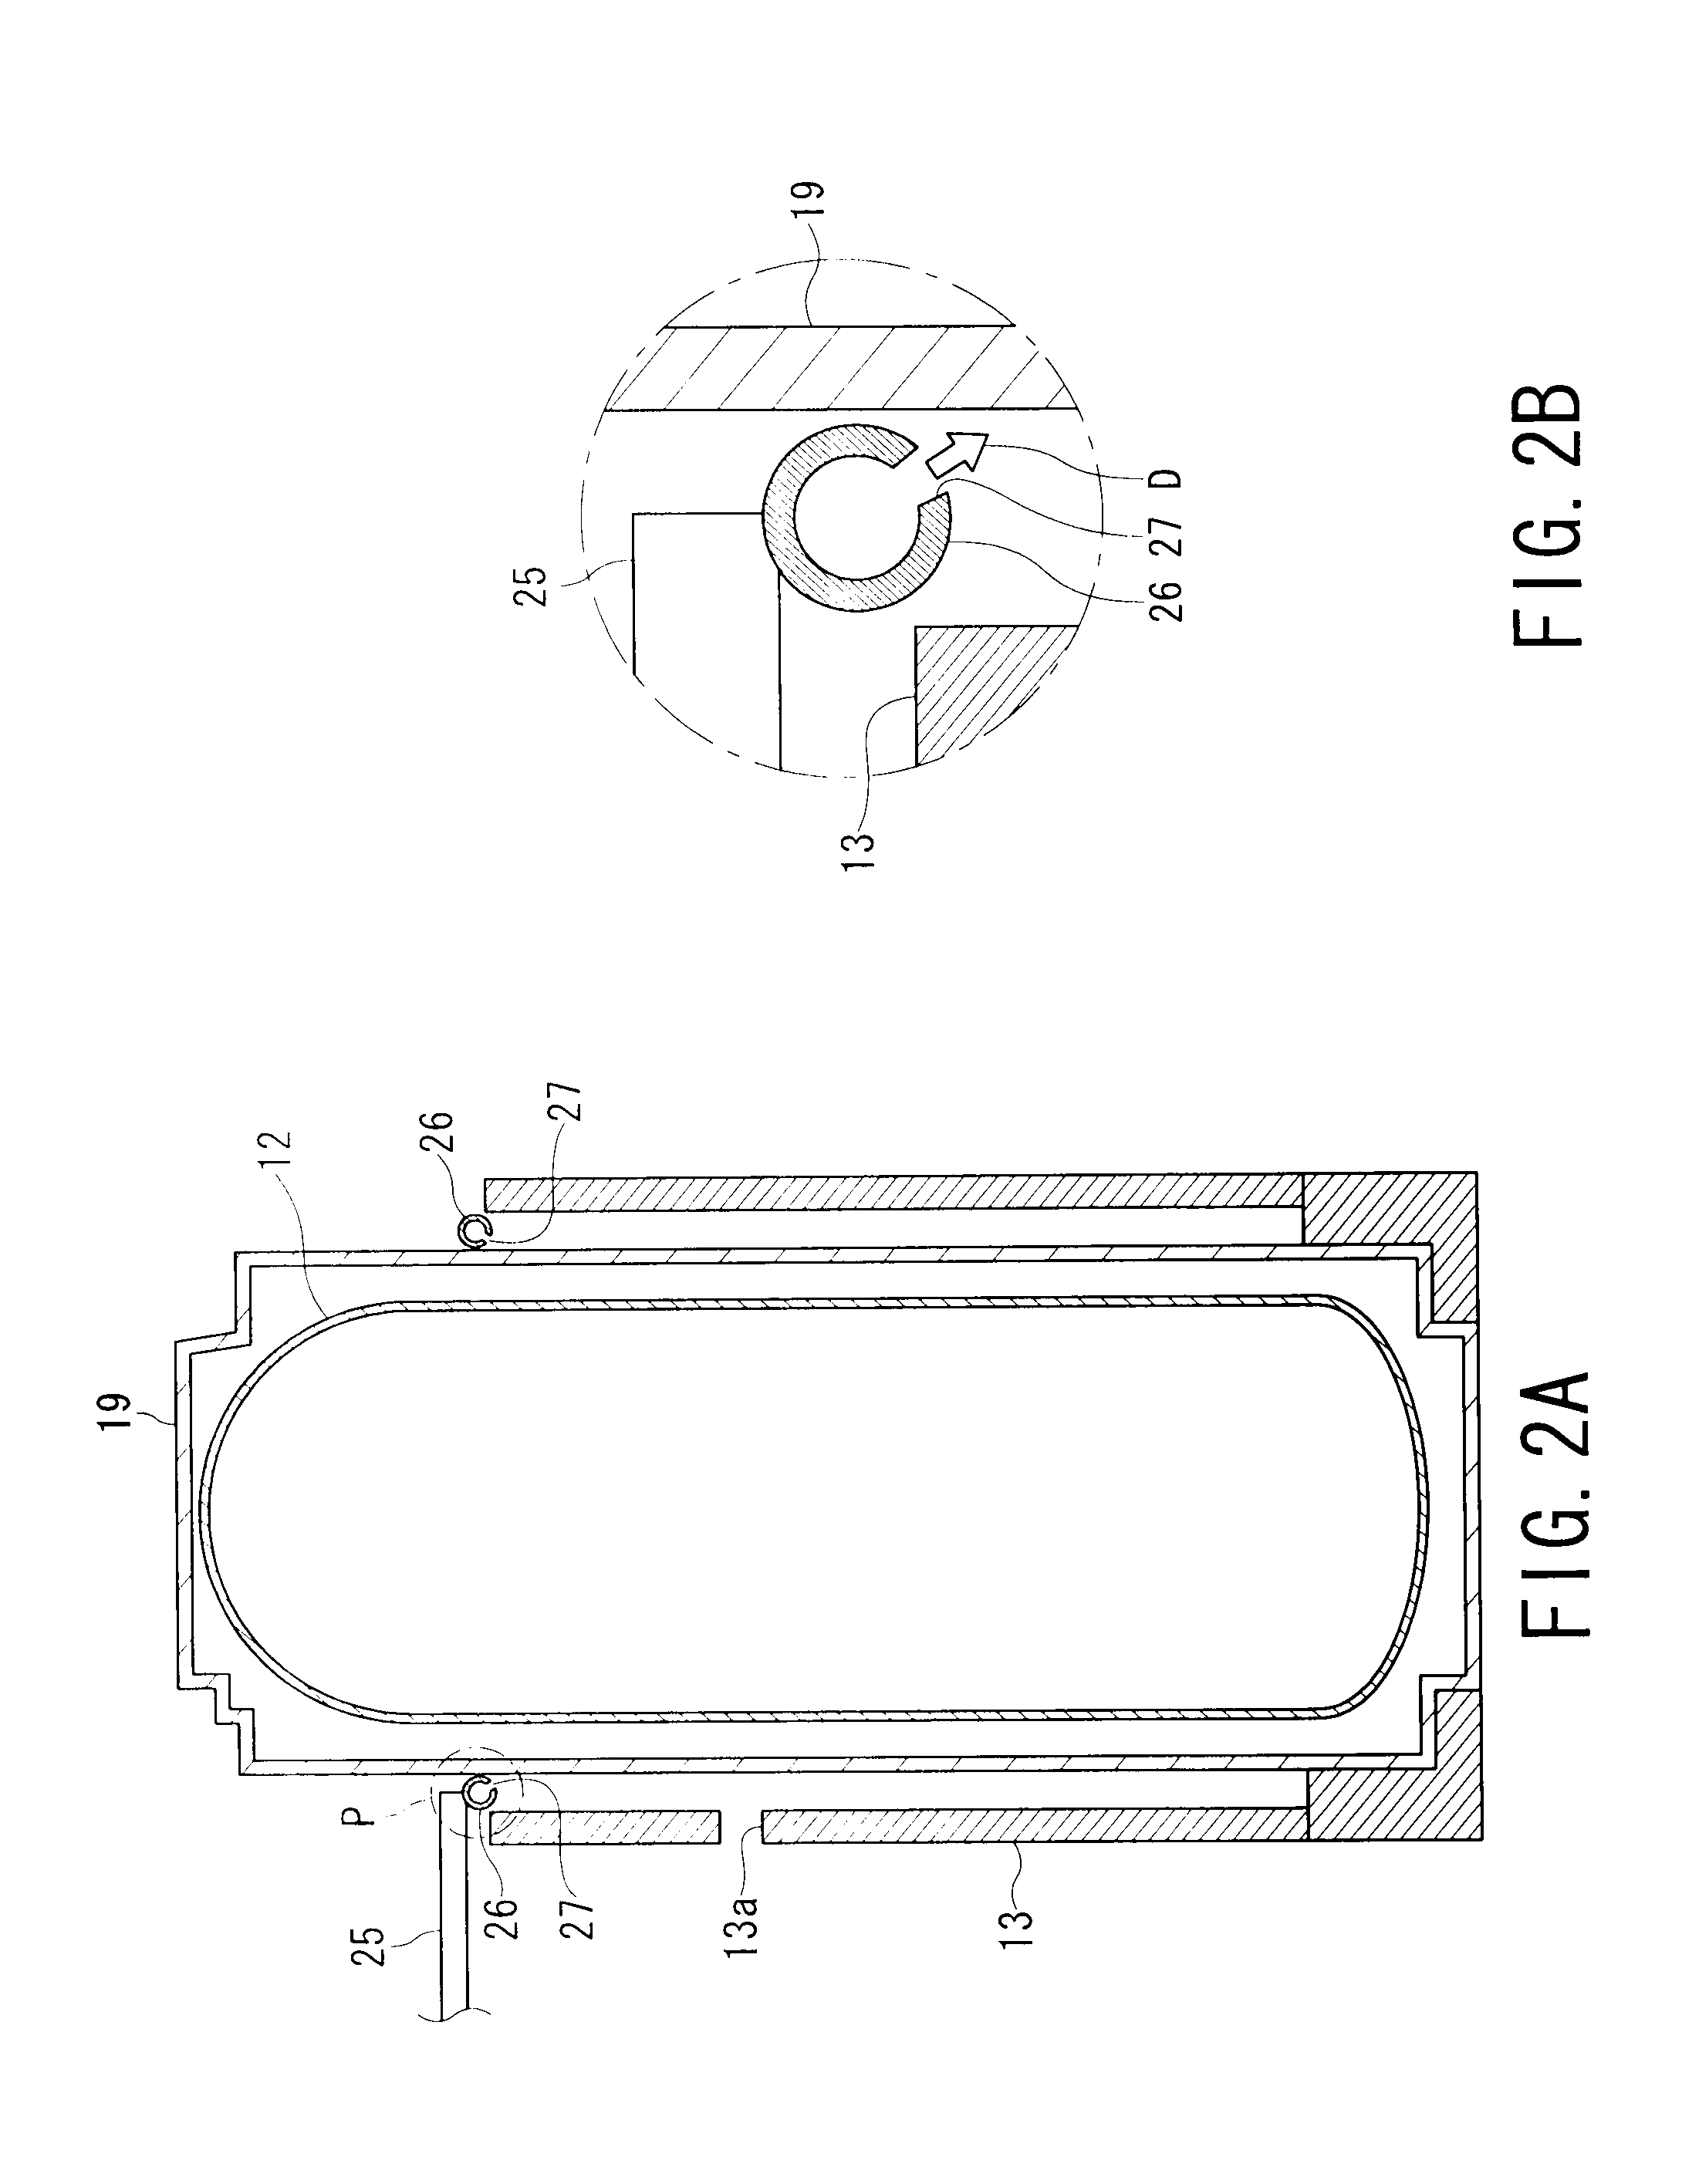 Reactor containment vessel cooling system, reactor containment vessel, and reactor containment vessel cooling method